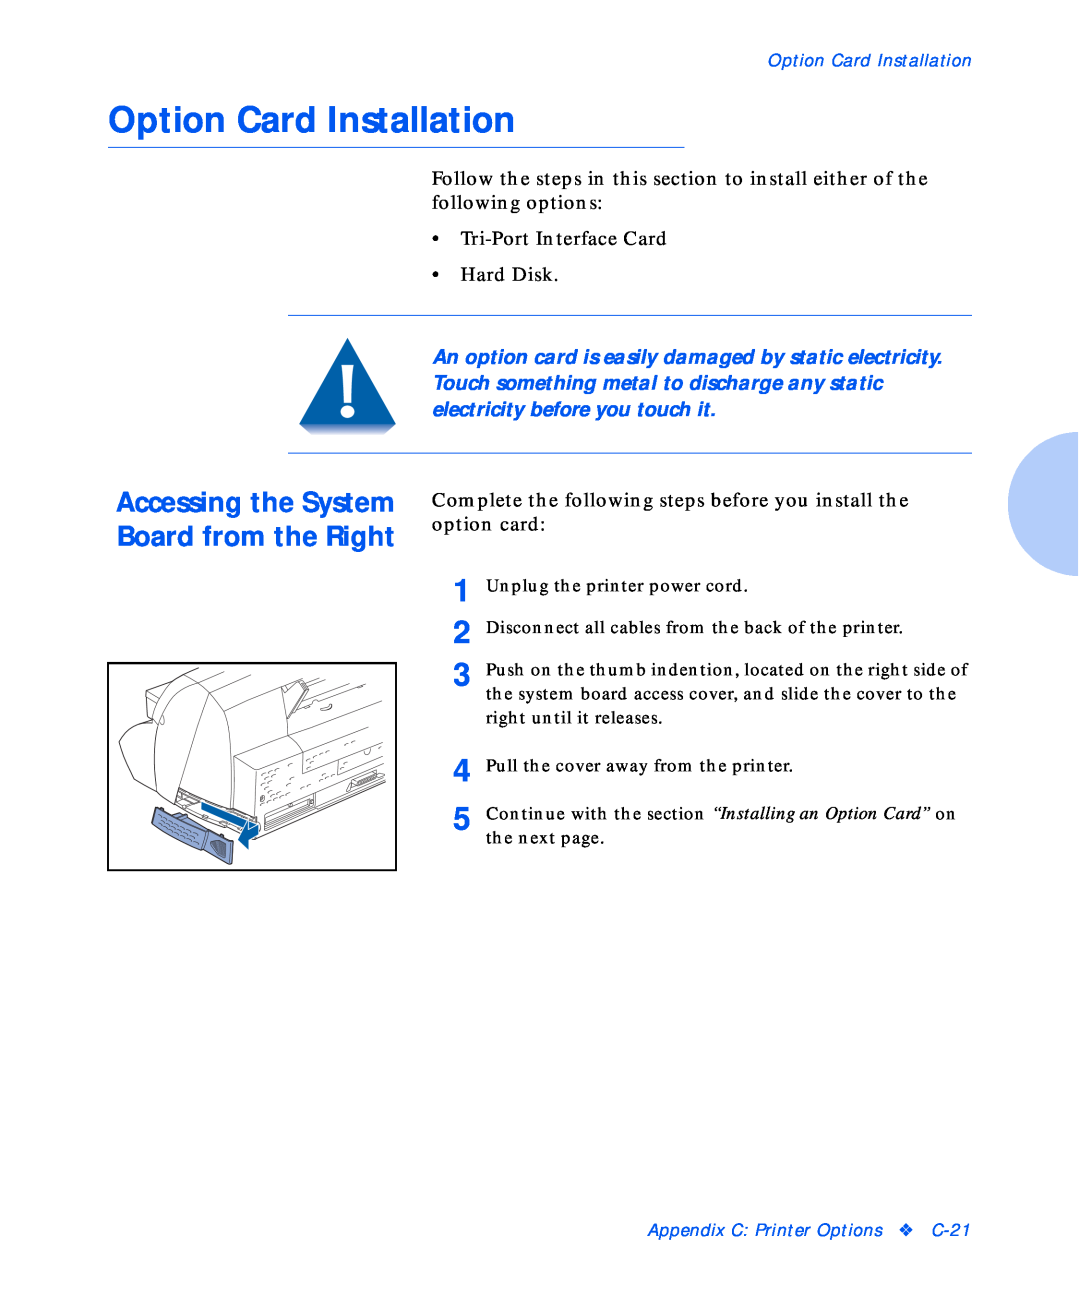 Xerox NC20 manual Option Card Installation, Accessing the System Board from the Right, Appendix C Printer Options C-21 